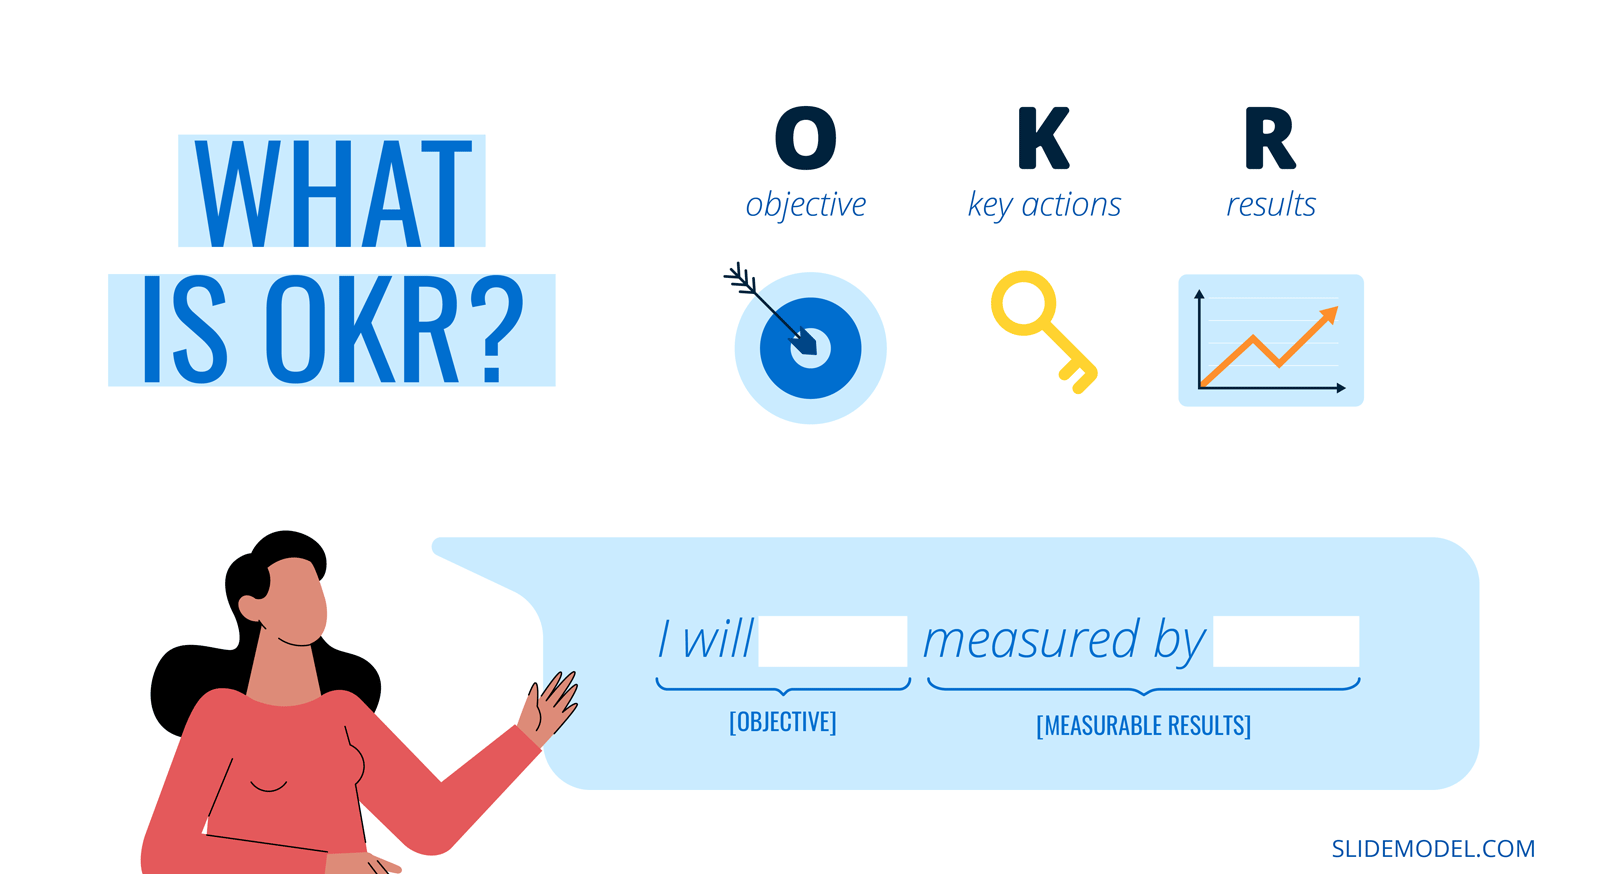 what is okr?